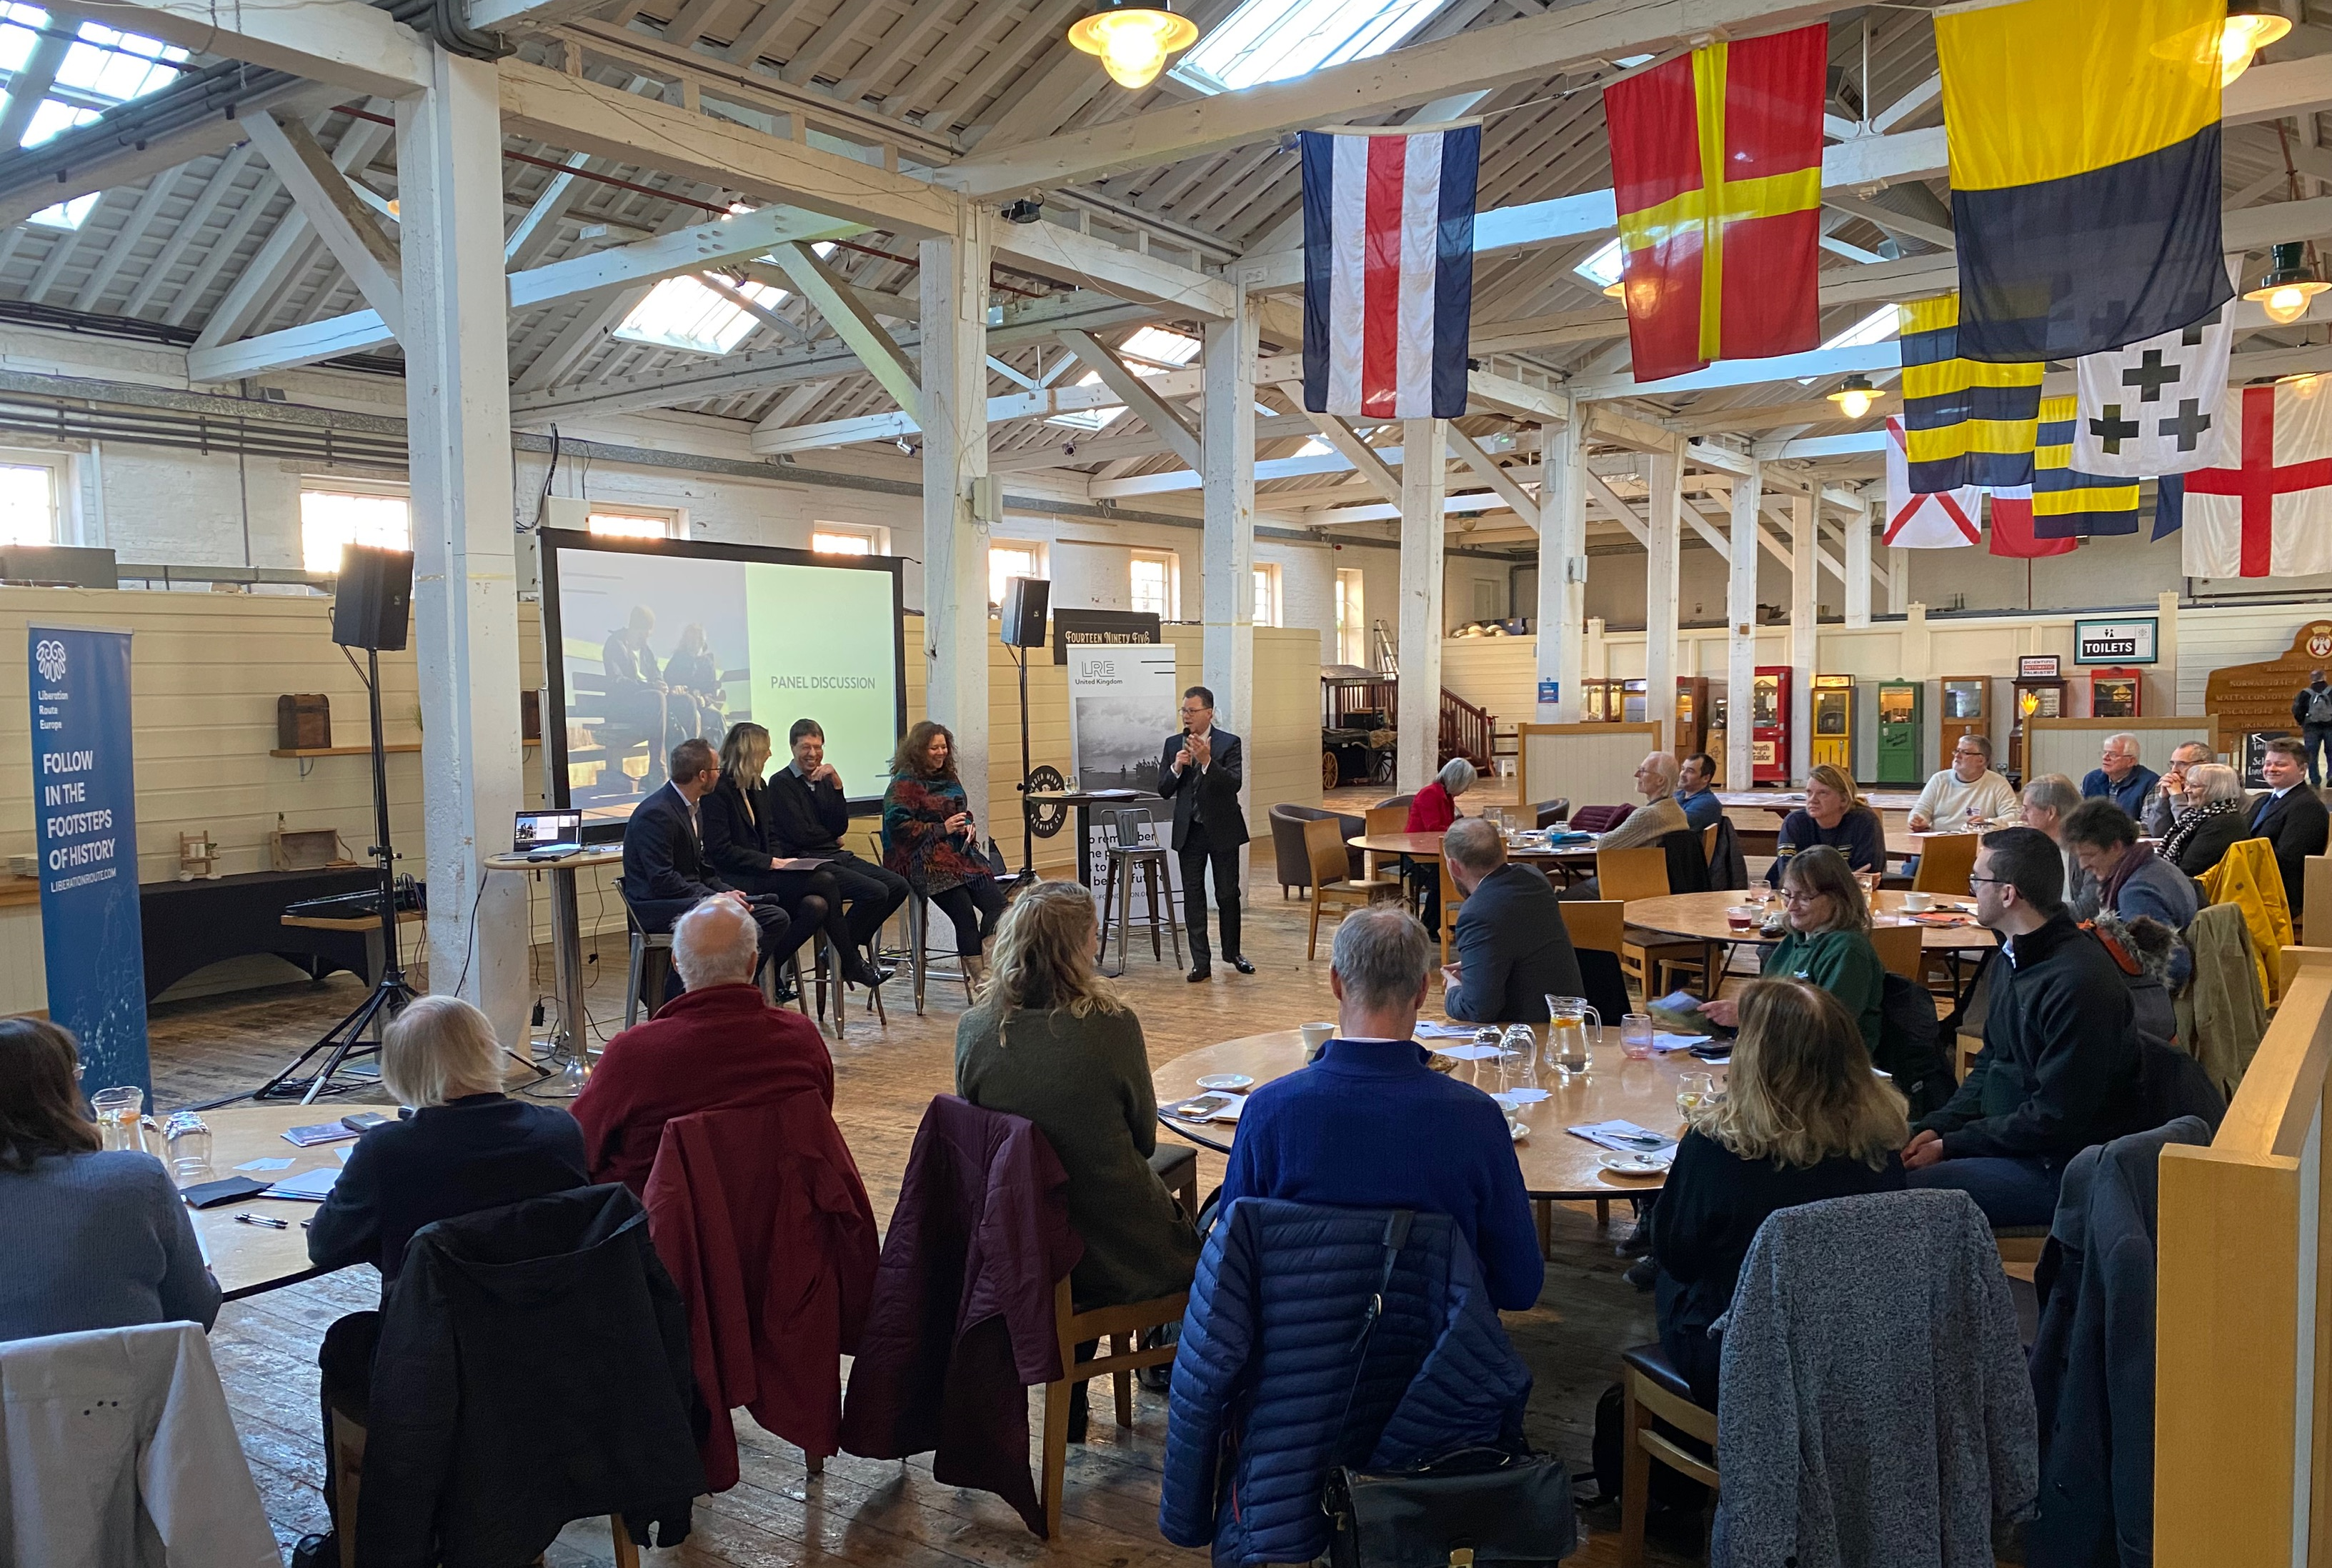 LRE UK hosts first outreach event in Portsmouth: an opportunity to involve local stakeholders in the UK section of the LRE Hiking Trails network